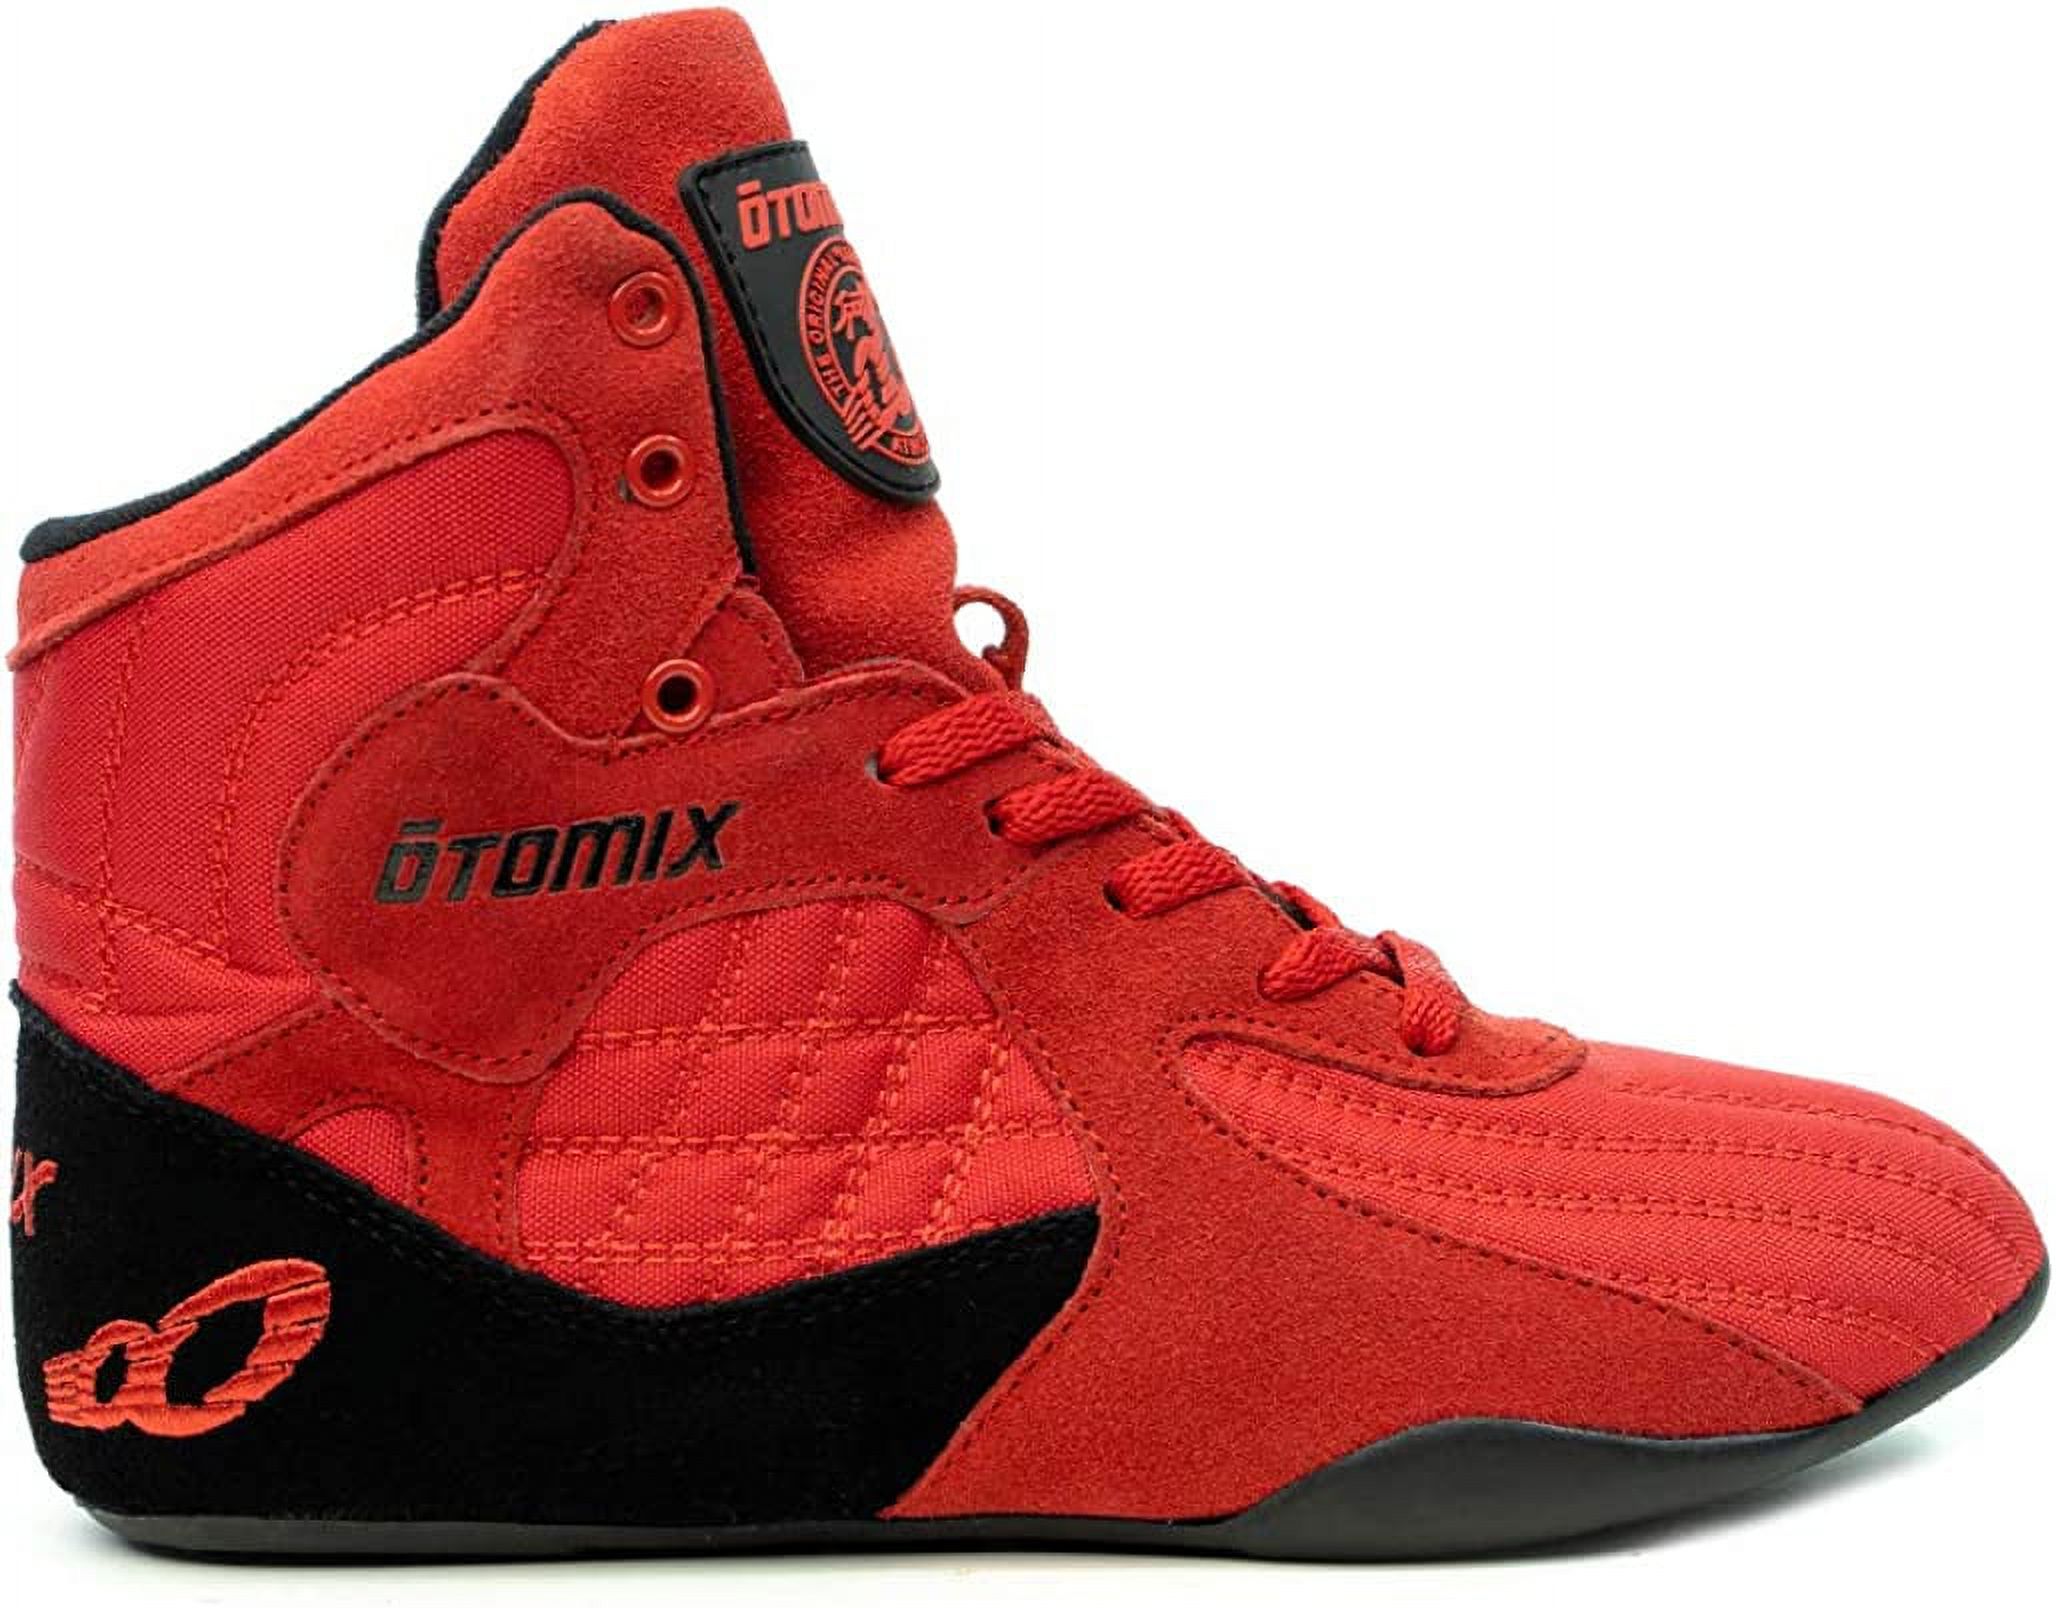 Otomix Red Stingray Escape Weightlifting & Grappling Shoe (Size 7.5) - image 4 of 5